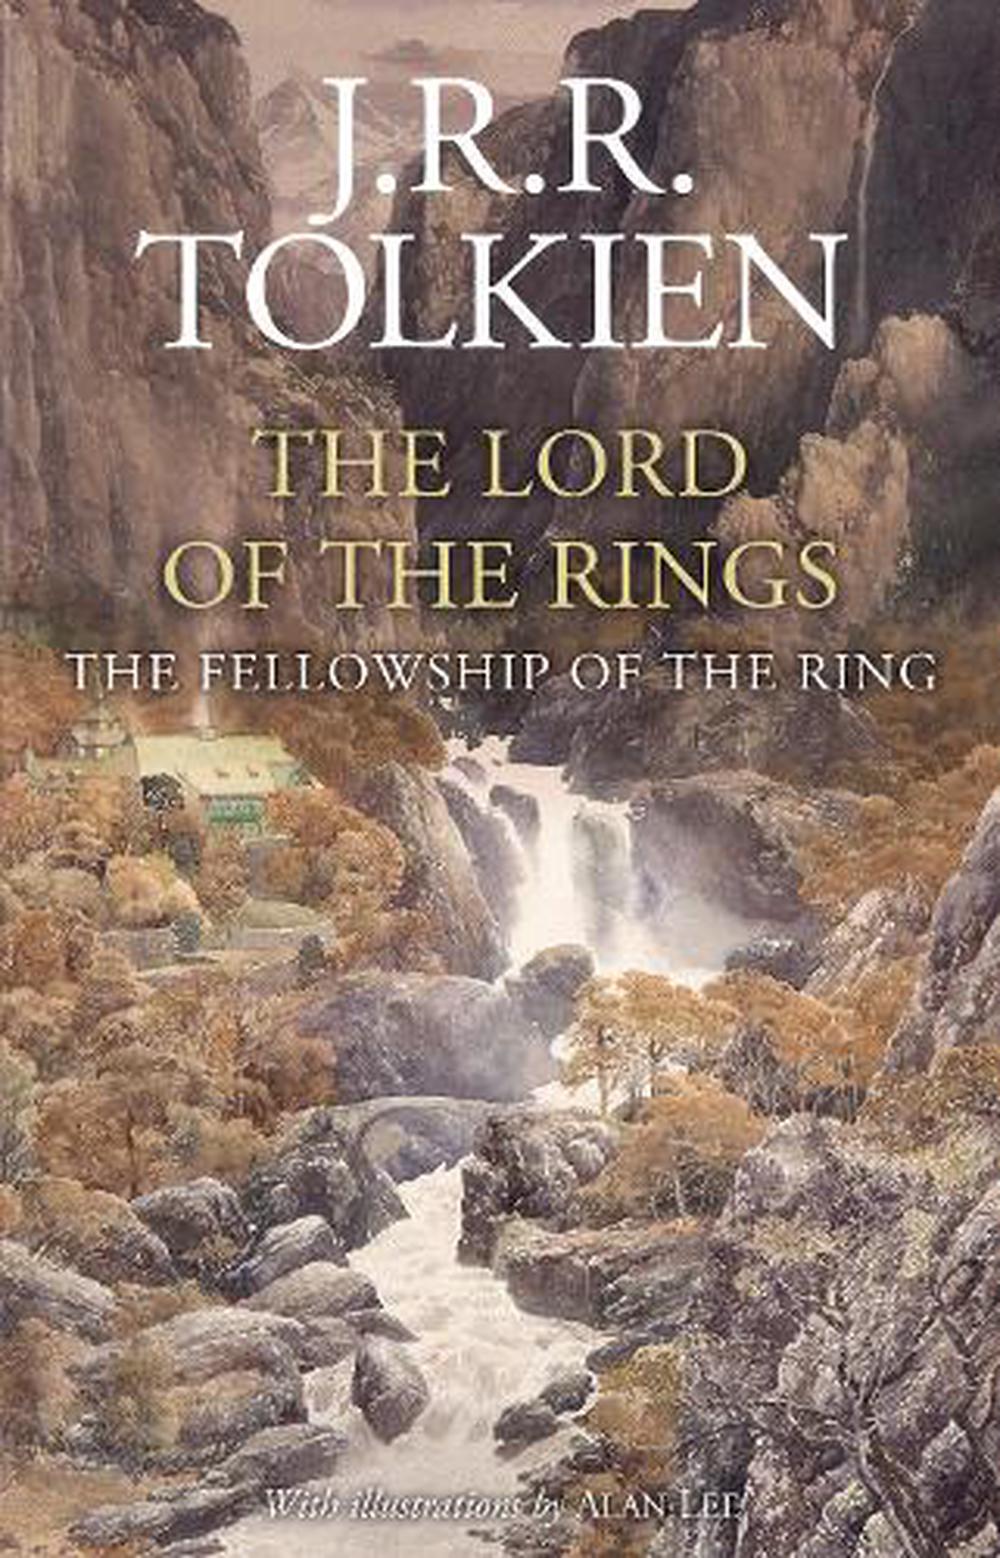 cover of the fellowship of the ring by jrr tolkien